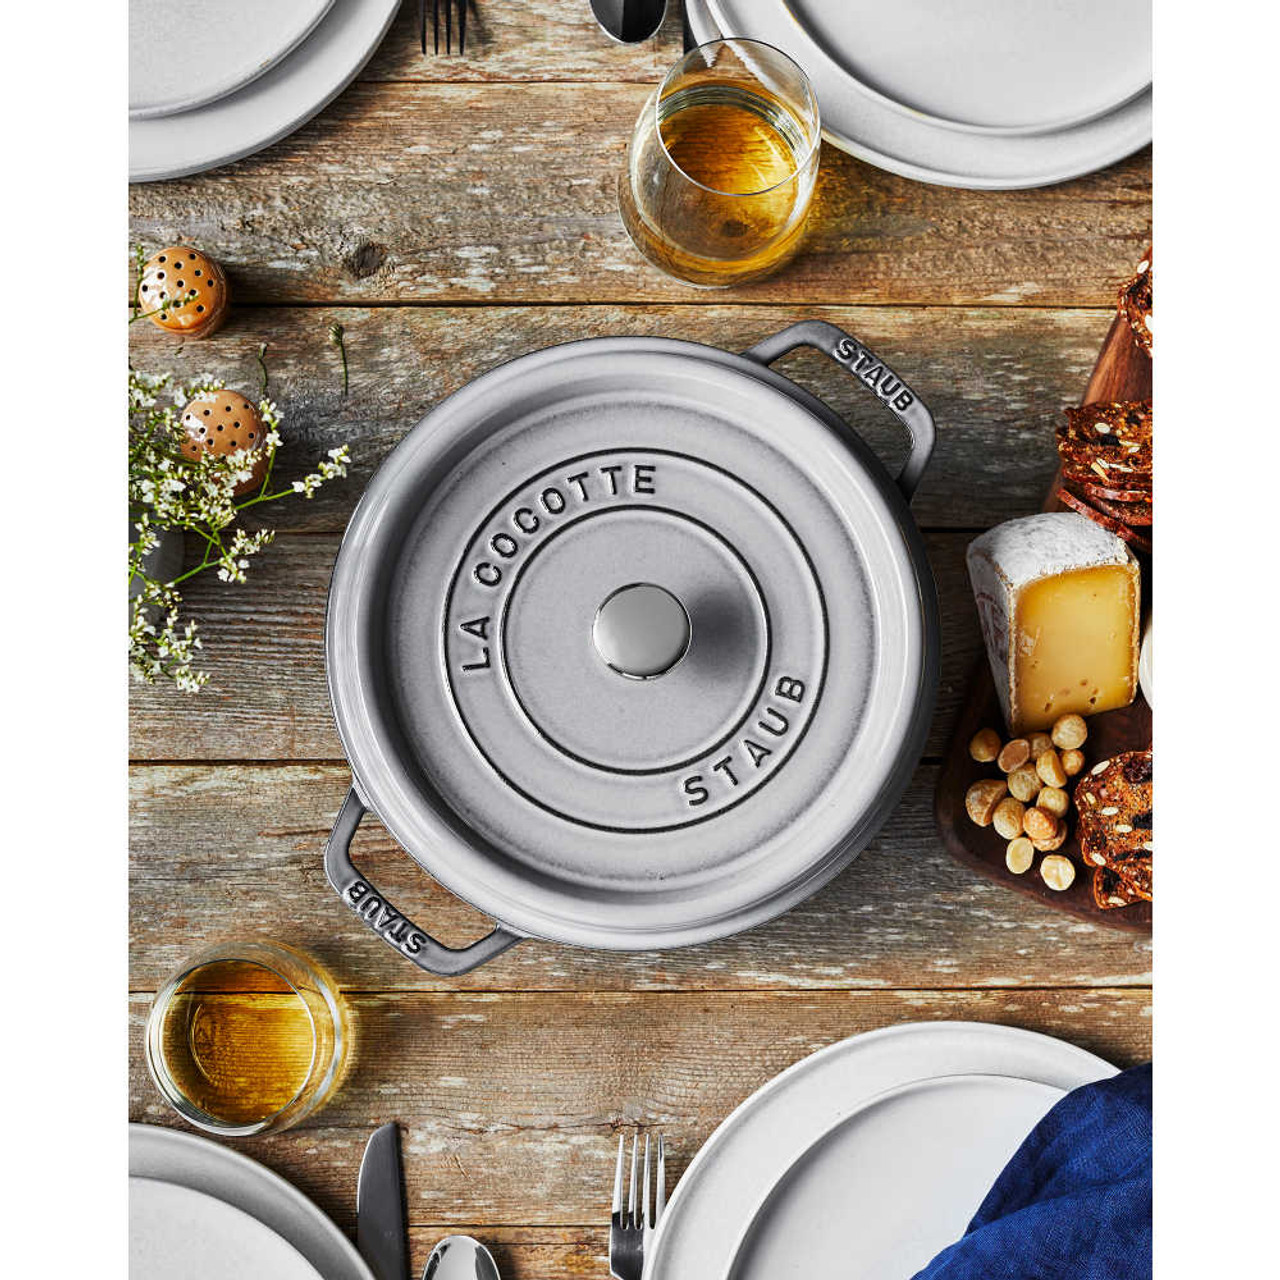 https://cdn11.bigcommerce.com/s-hccytny0od/images/stencil/1280x1280/products/5816/26569/Staub_Cast_Iron_Round_Cocotte_in_Graphite_Grey__01234.1702420243.jpg?c=2?imbypass=on